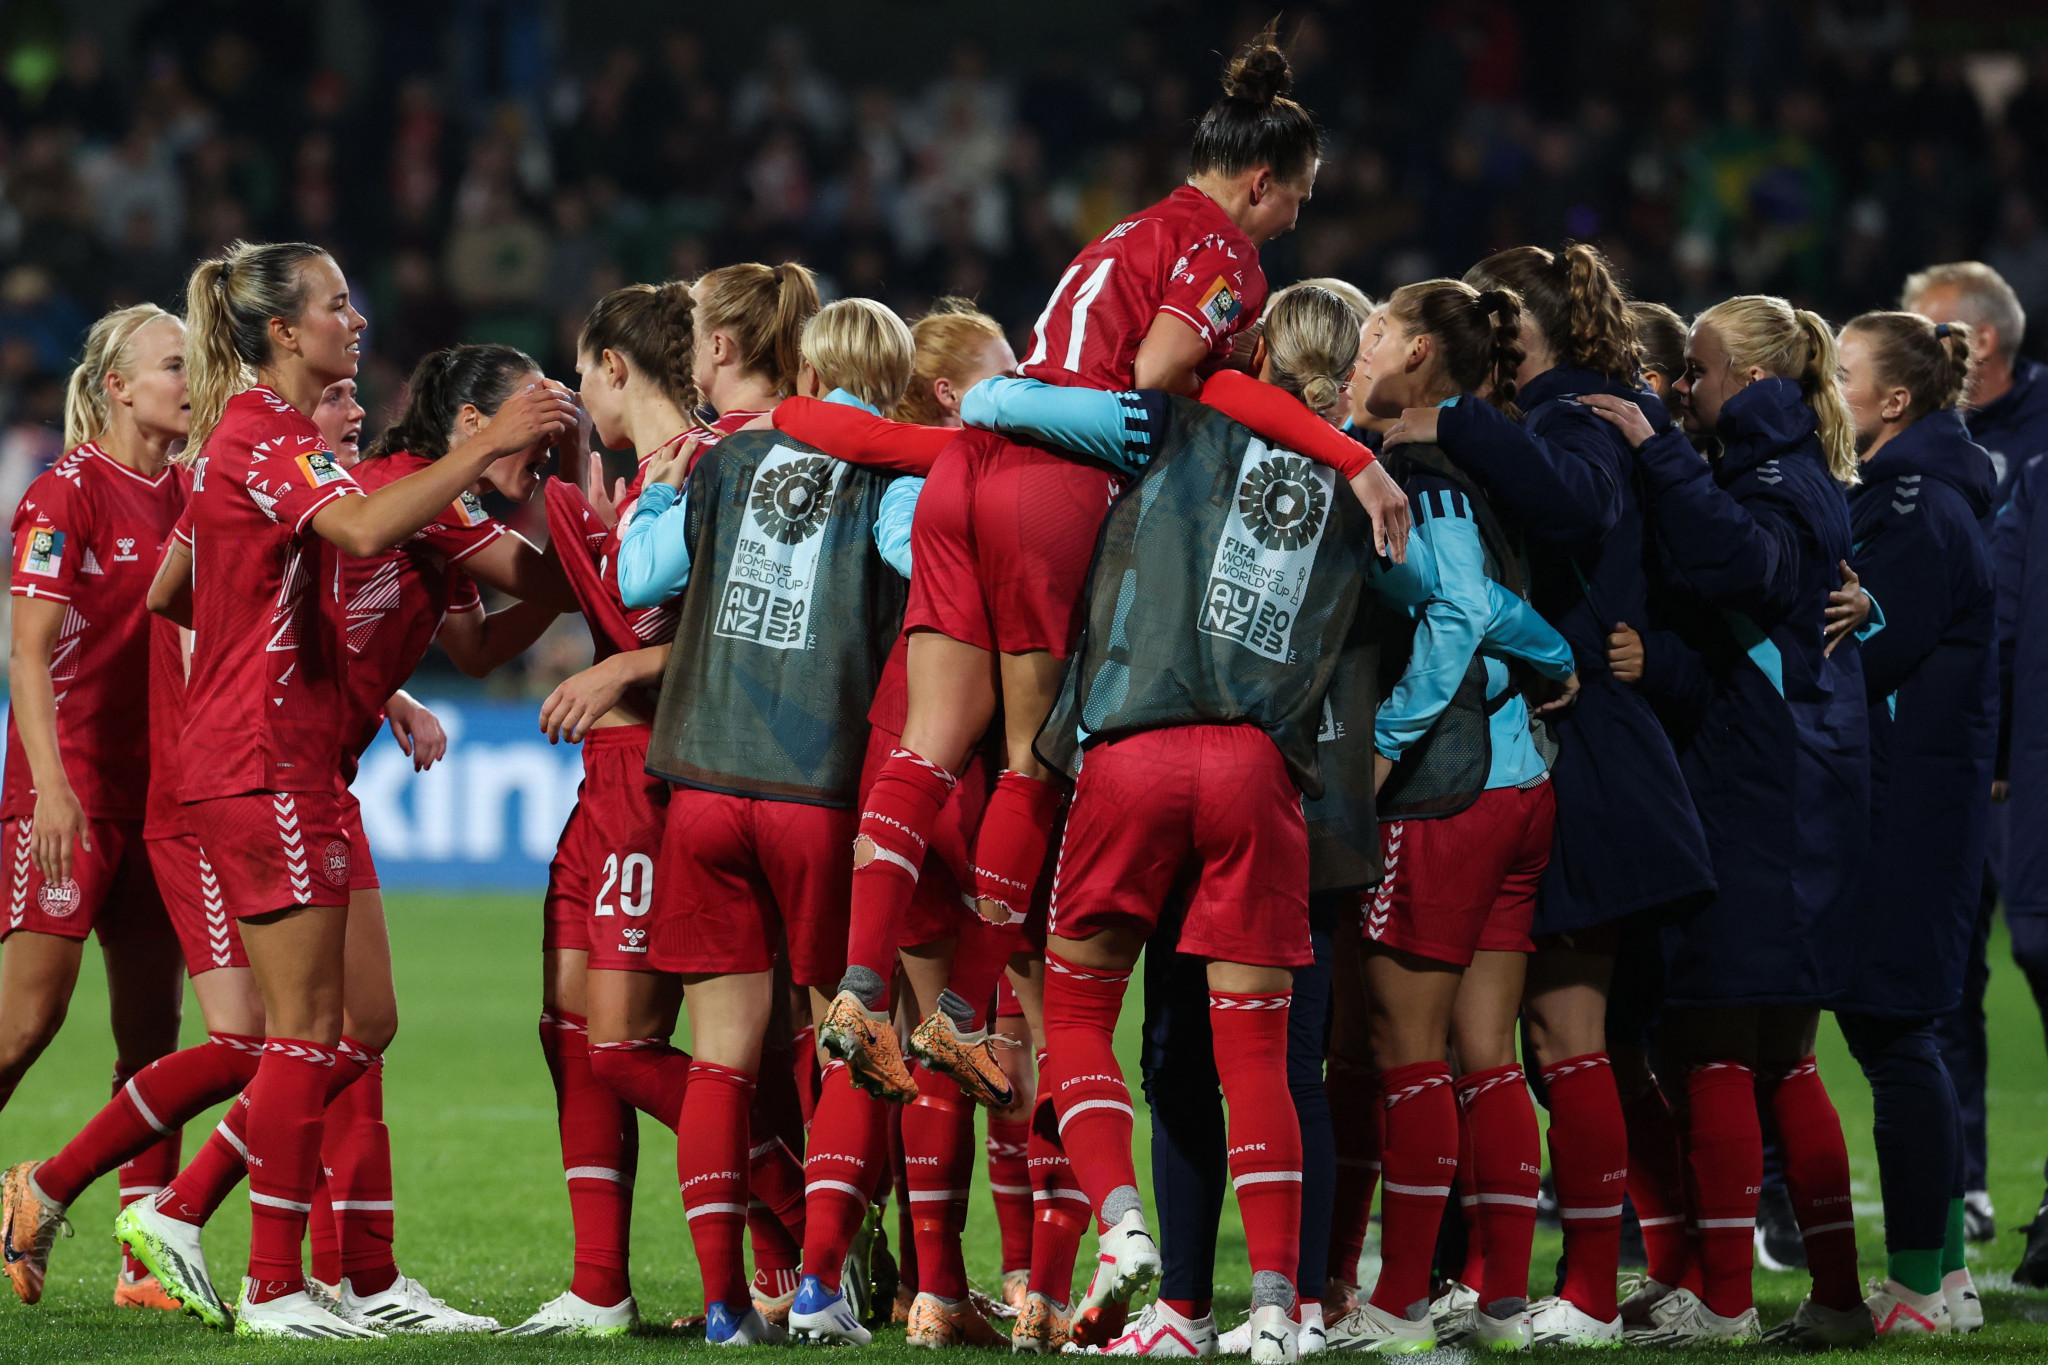 A late header from Amalie Vangsgaard helped Denmark to start their tournament with a 1-0 win against China in the day's fourth and final match ©Getty Images